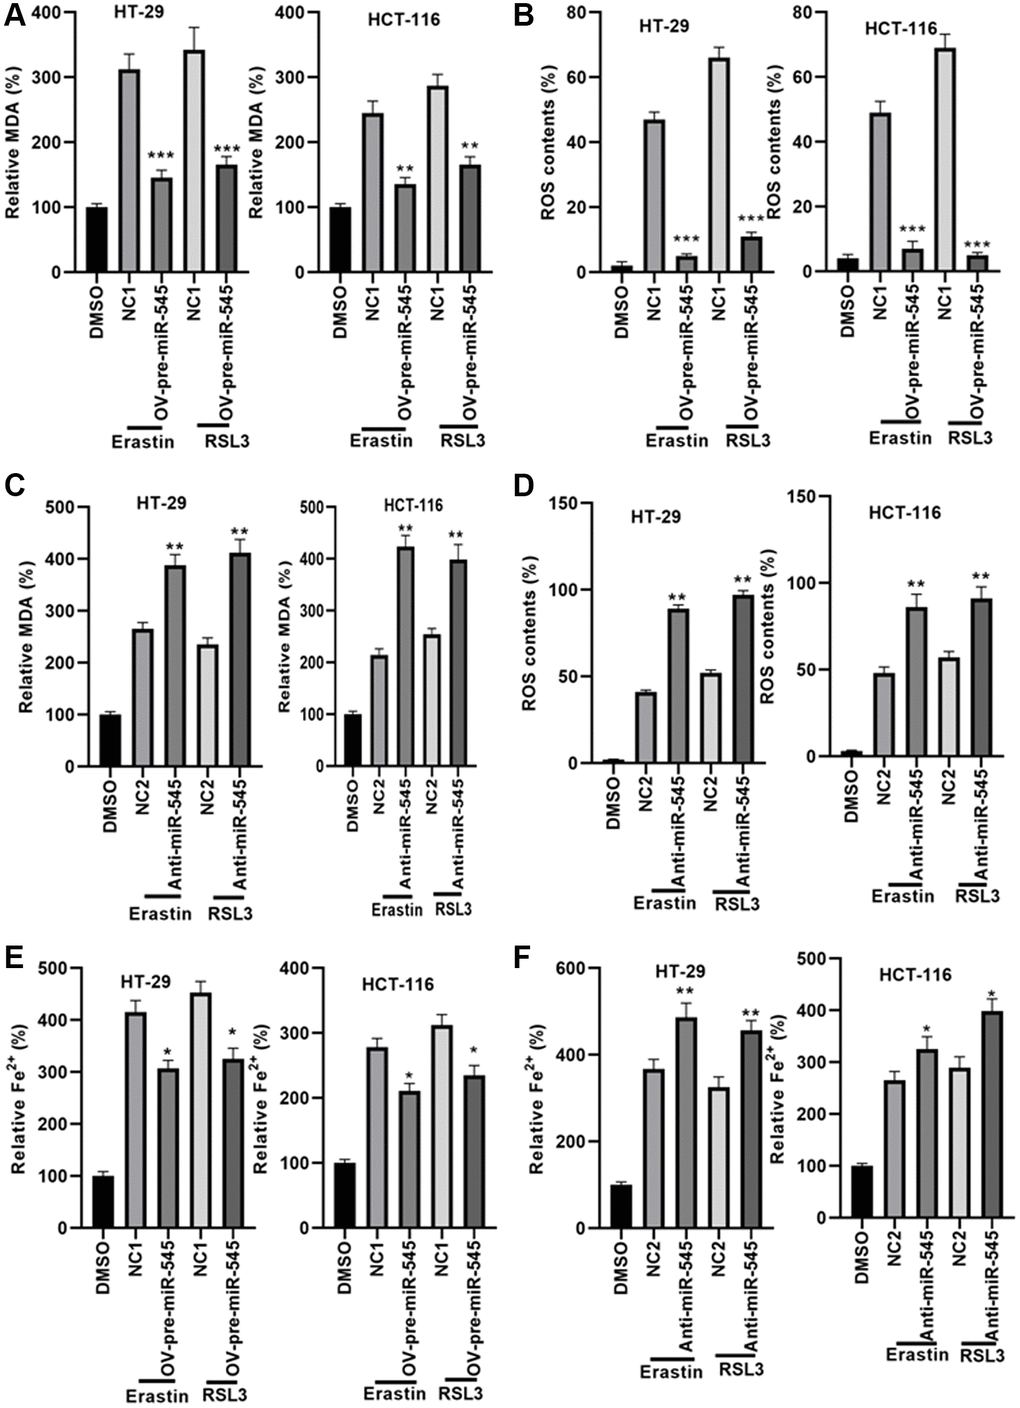 miR-545 decreased lipid oxidation and iron accumulation in HT-29 and HCT-116 cells. An erastin and RSL3-induced increase in MDA and ROS levels was significantly reduced in HT-29 and HCT-116 cells transfected with OV-pre-miR-545 (A), while inhibition of miR-545 further increased MDA and ROS levels (B), in both HT-29 and HCT-116 cells. ROS levels were reduced in HT-29 and HCT-116 cells transfected with OV-pre-miR-545 (C), but inhibition of miR-545 further increased ROS levels (D), in both HT-29 and HCT-116 cells. (E) Levels of ferrous iron (Fe2+) were decreased in HT-29 and HCT-116 cells transfected with OV-pre-miR-545 following treatment with erastin and RSL3. (F) Anti-miR-545 further increased Fe2+ levels in erastin and RSL3-treated HT-29 and HCT-116 cells. *p **p ***p 